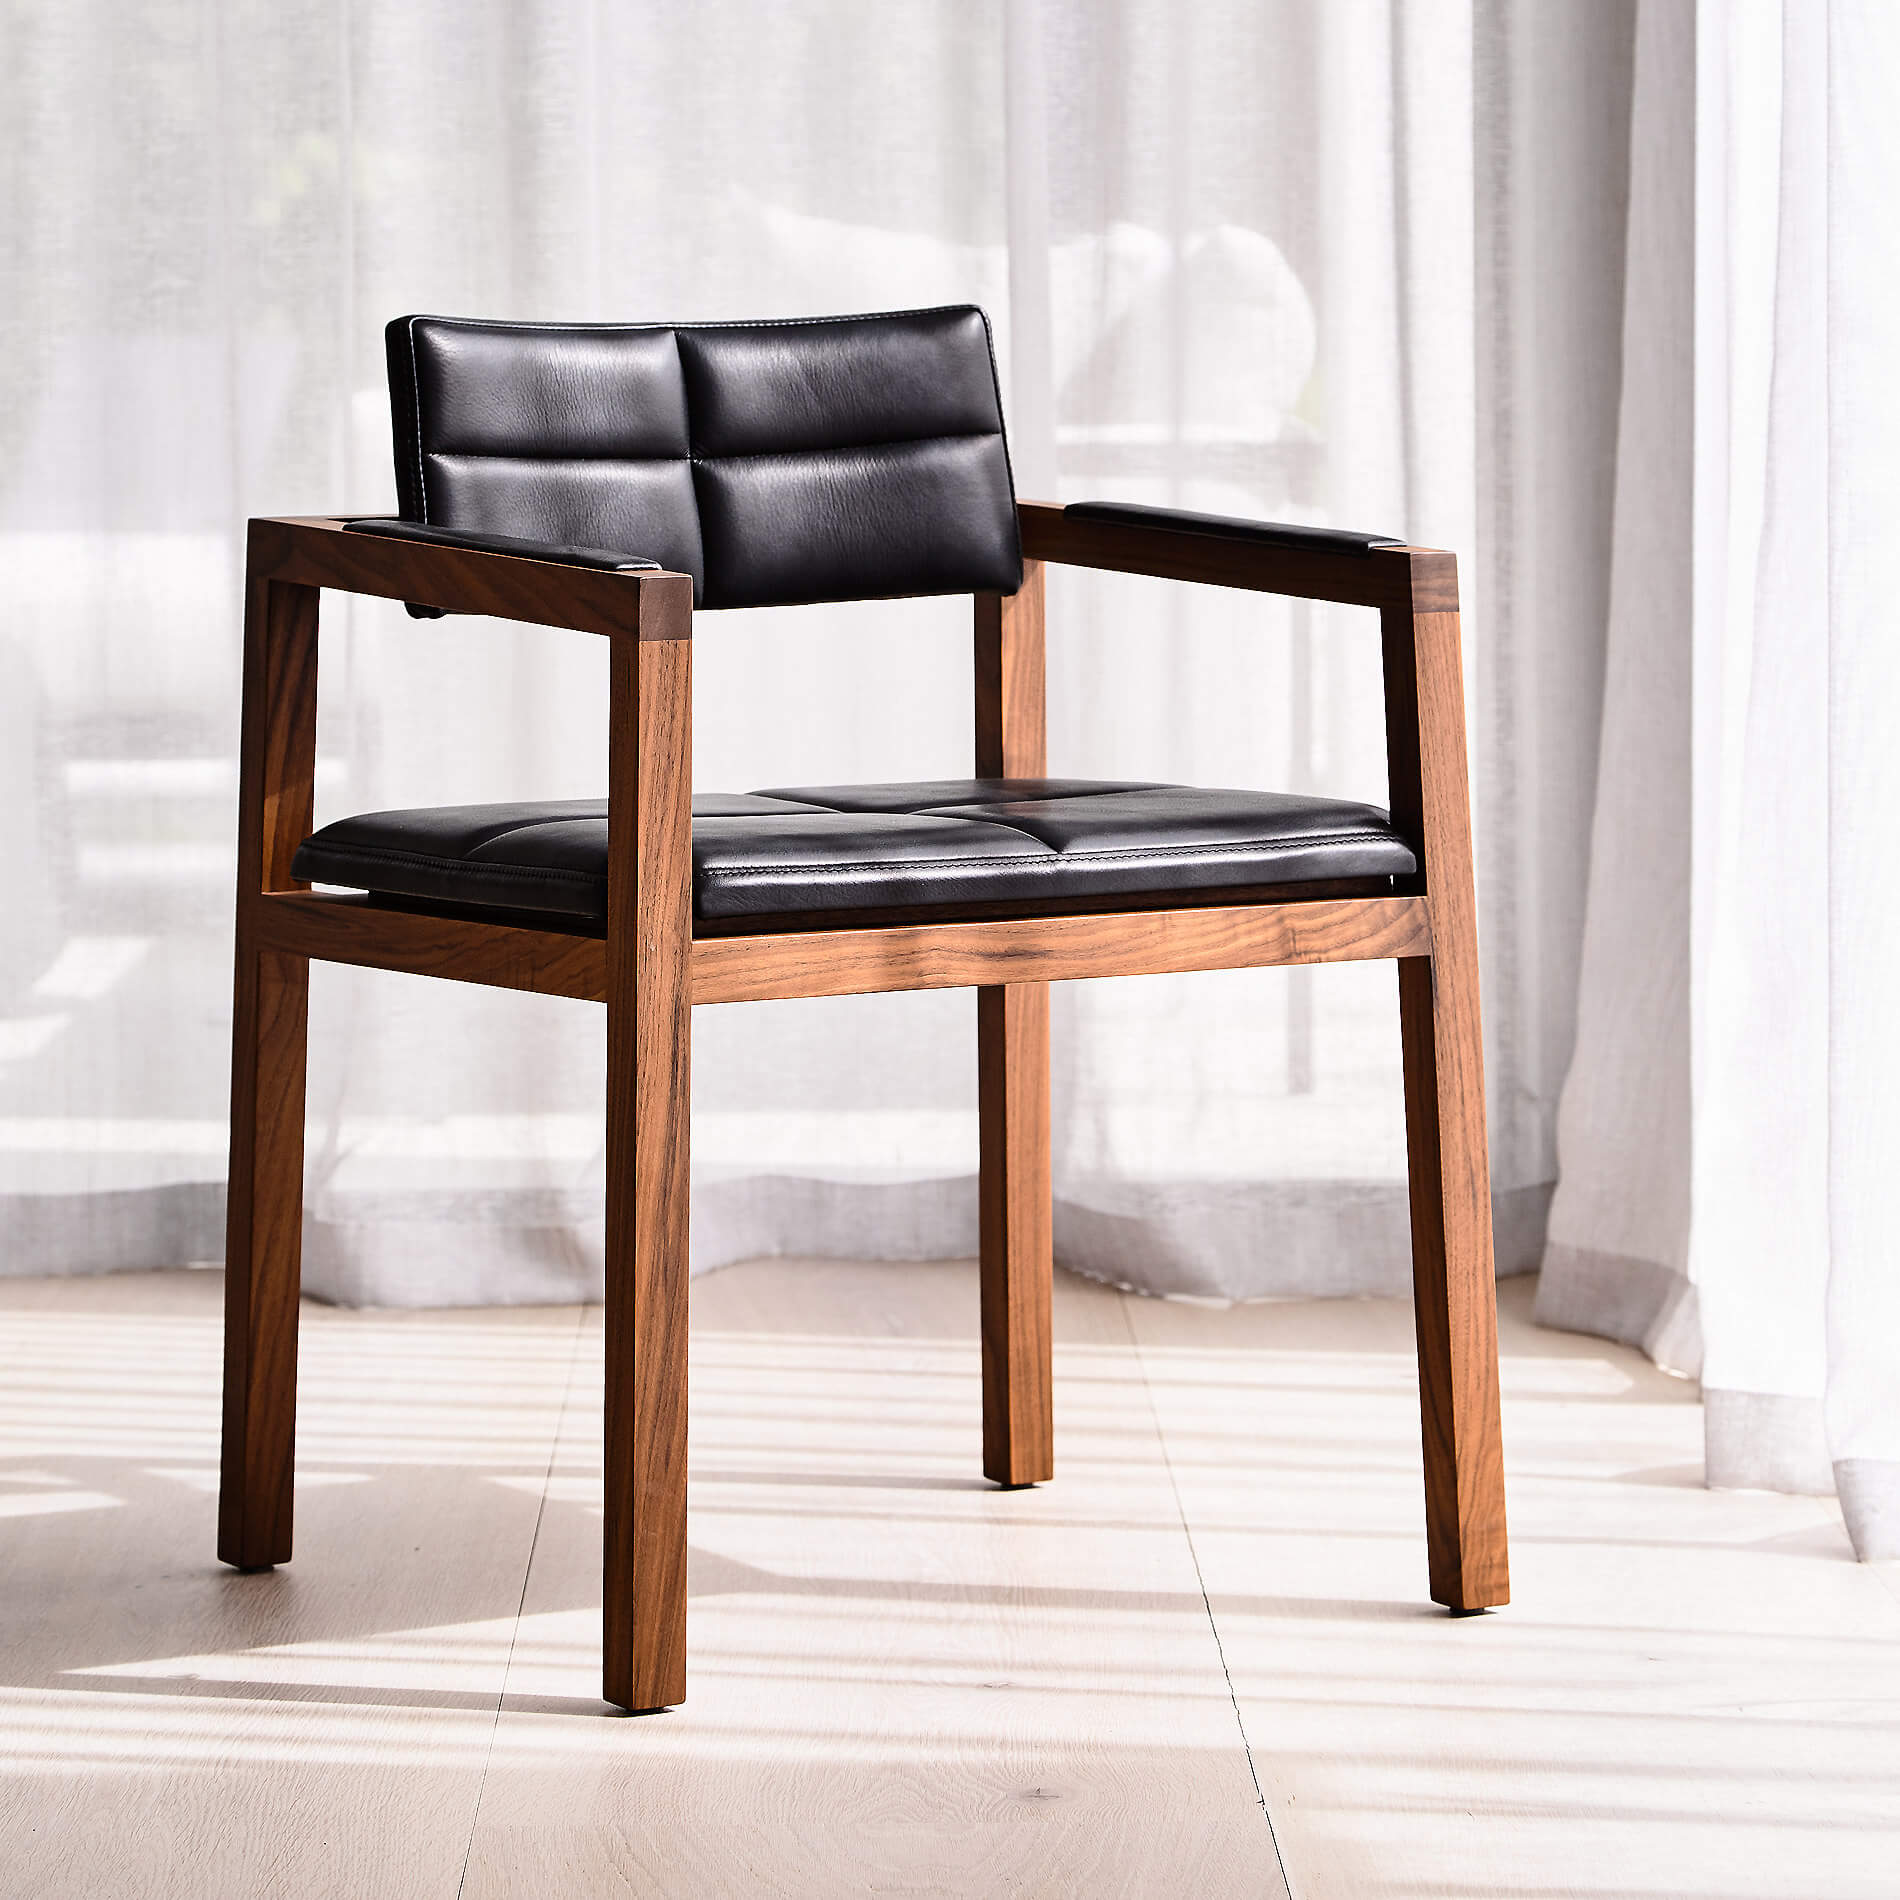 sun shines in from full height glass windows onto designer dining chair with a walnut frame and soft supple black leather